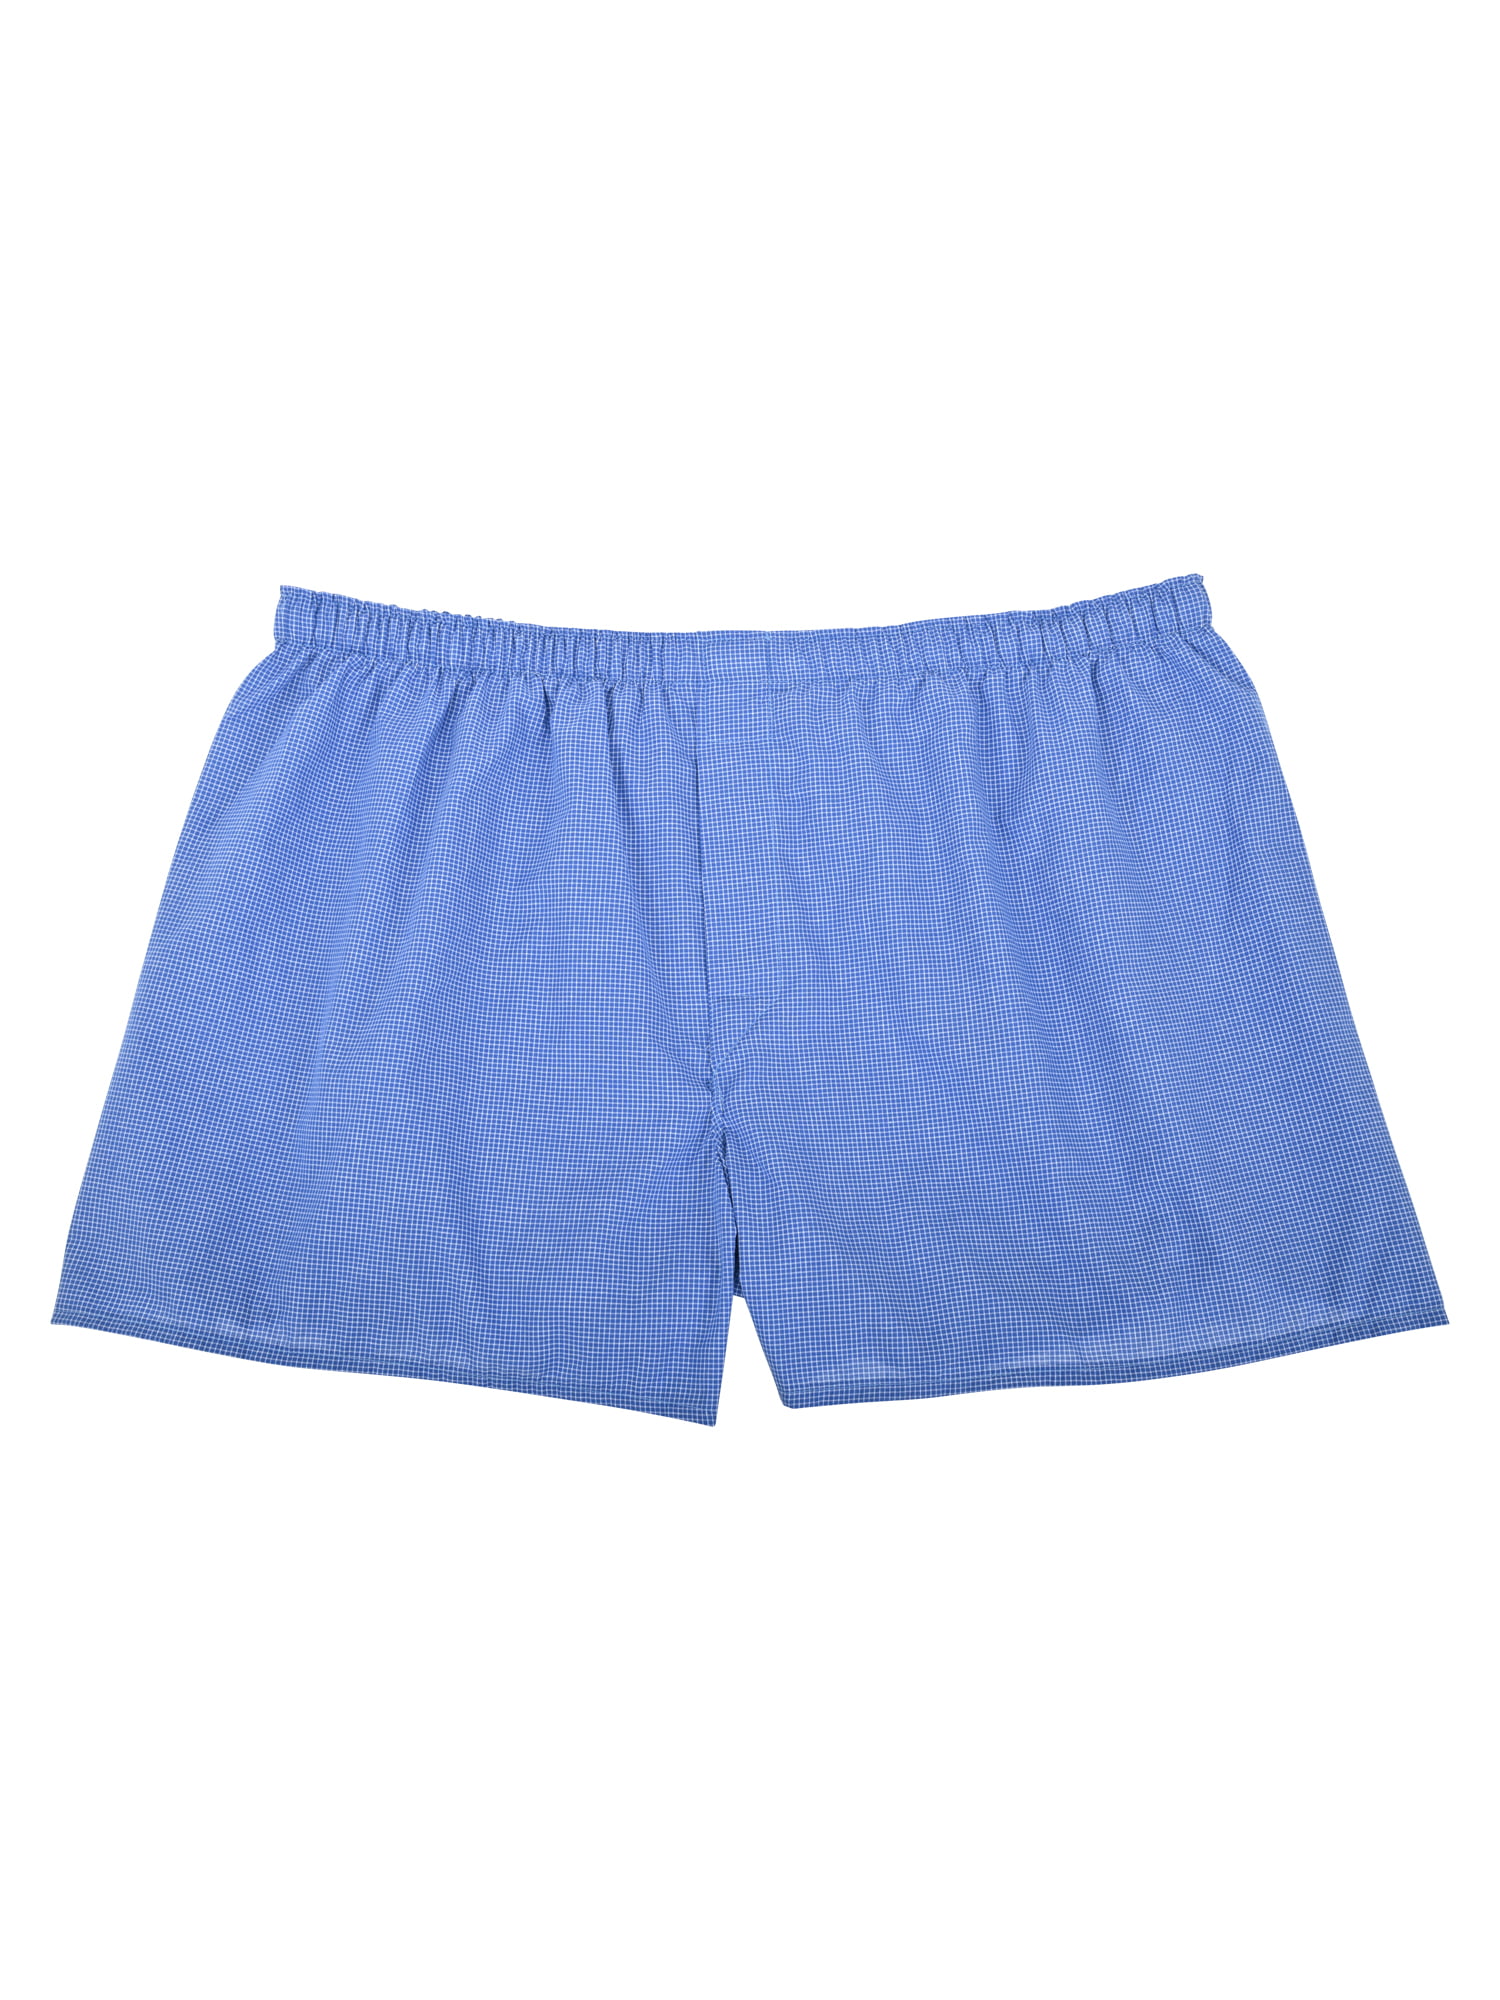 BoohooMAN 3 Pack Ofcl Woven Boxer Shorts in Blue for Men